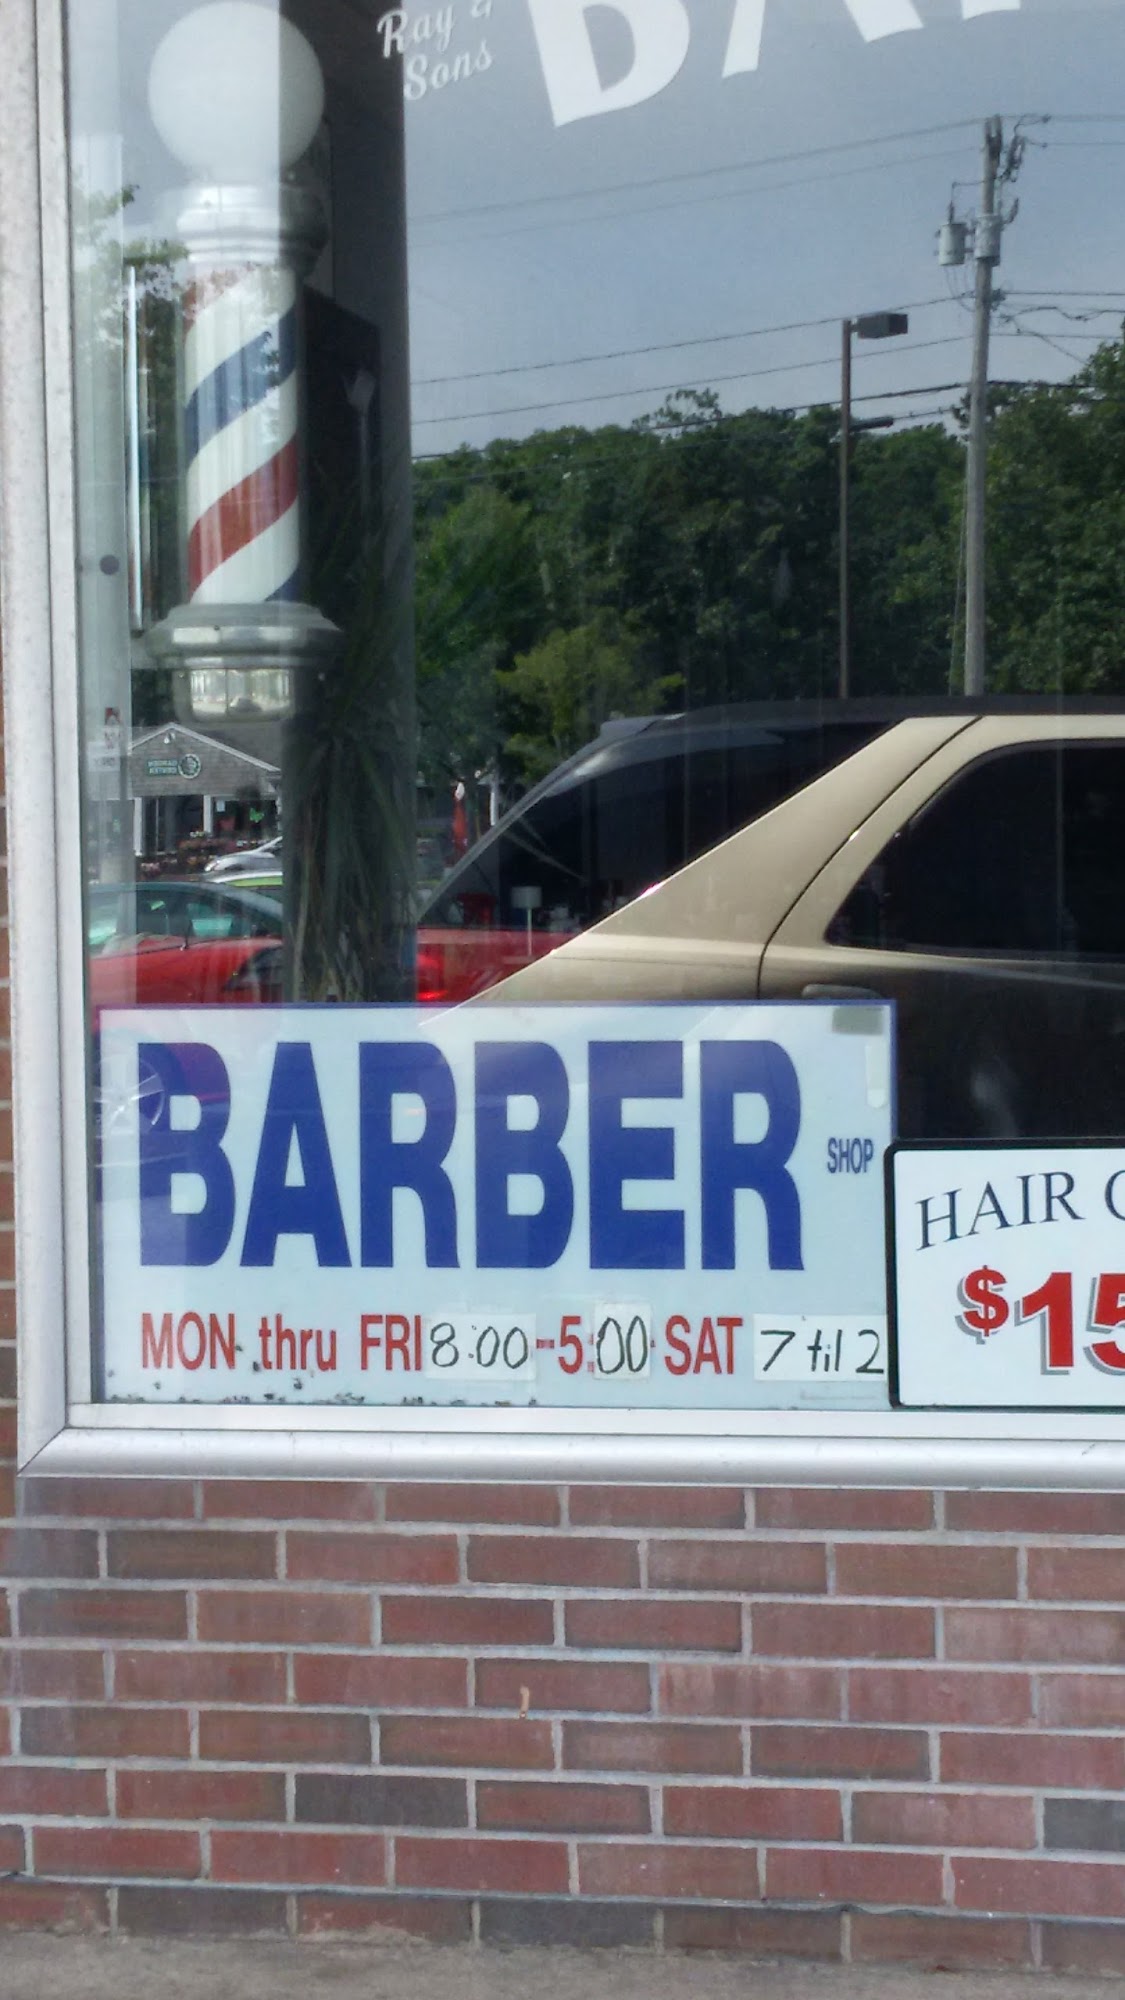 Ray & Sons Barber Shop 1088 MA-28, South Yarmouth Massachusetts 02664